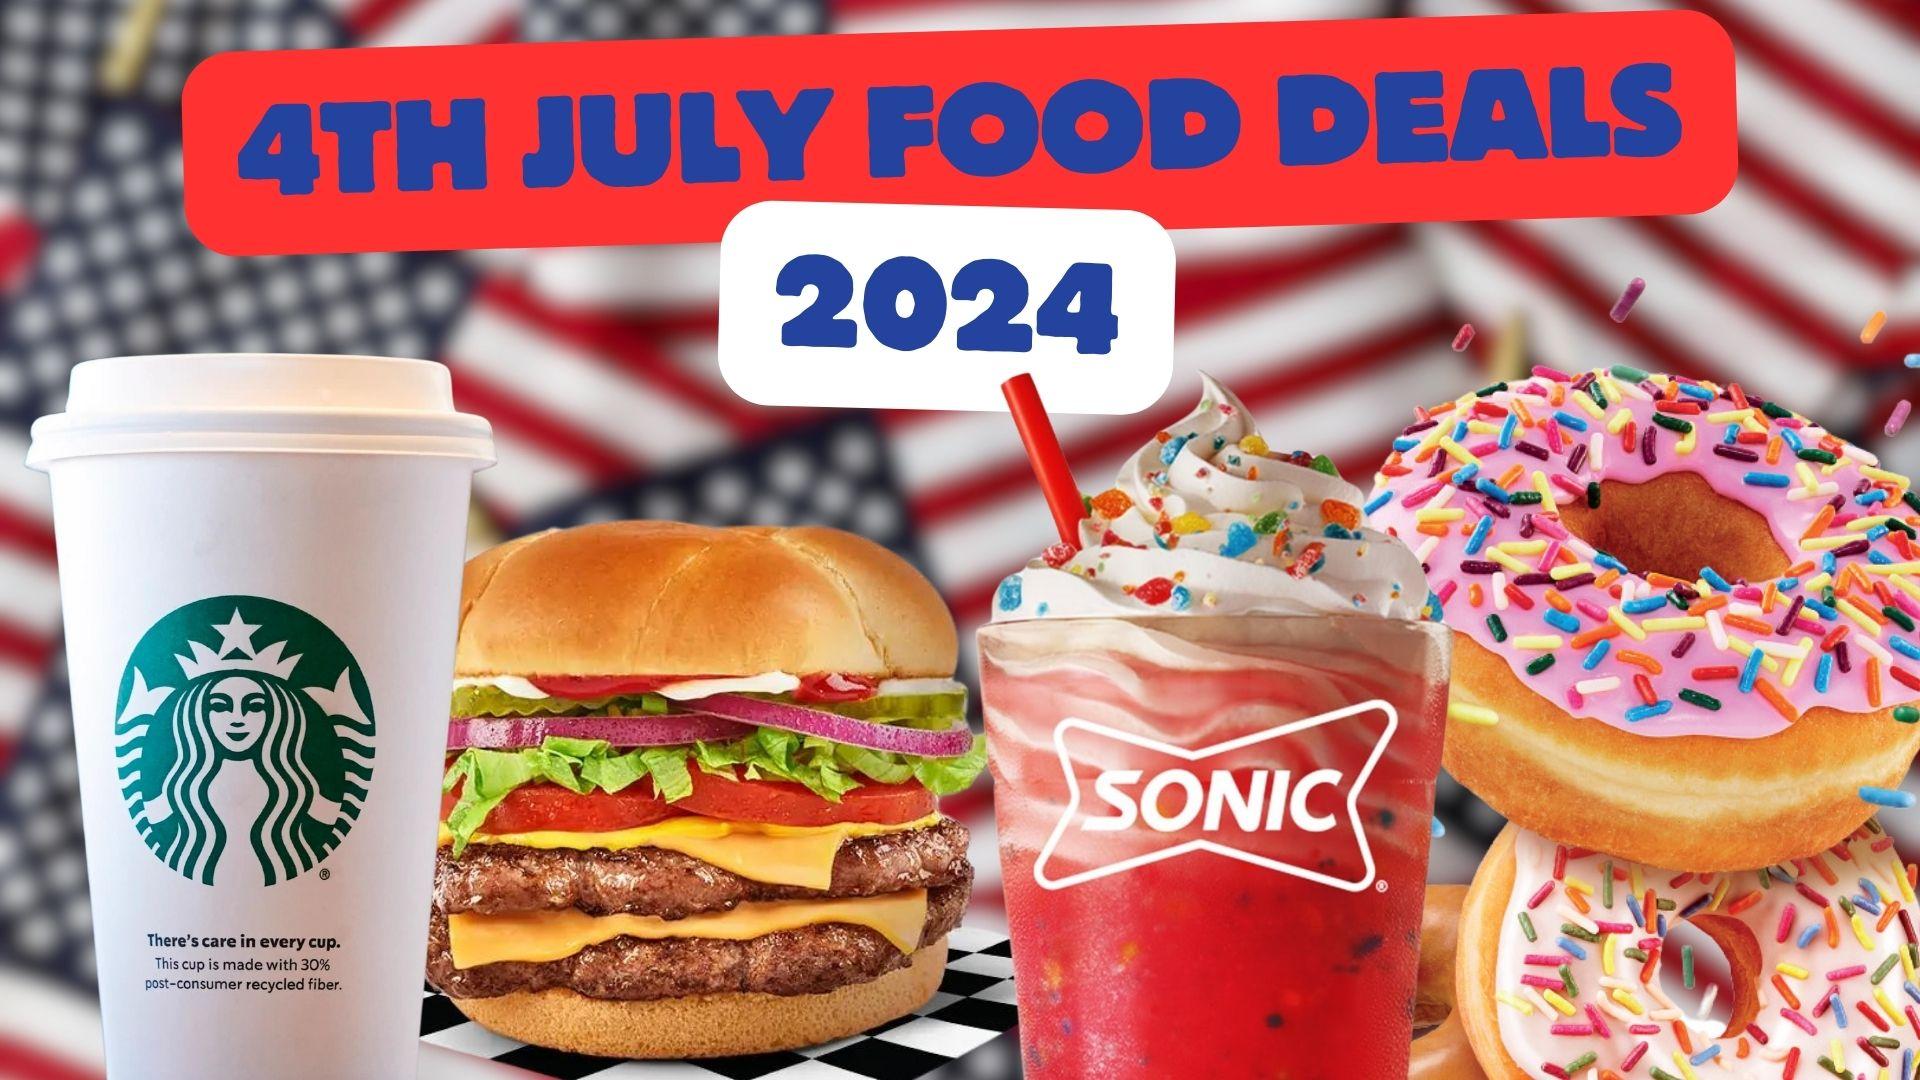 fast food deals for 4th july.